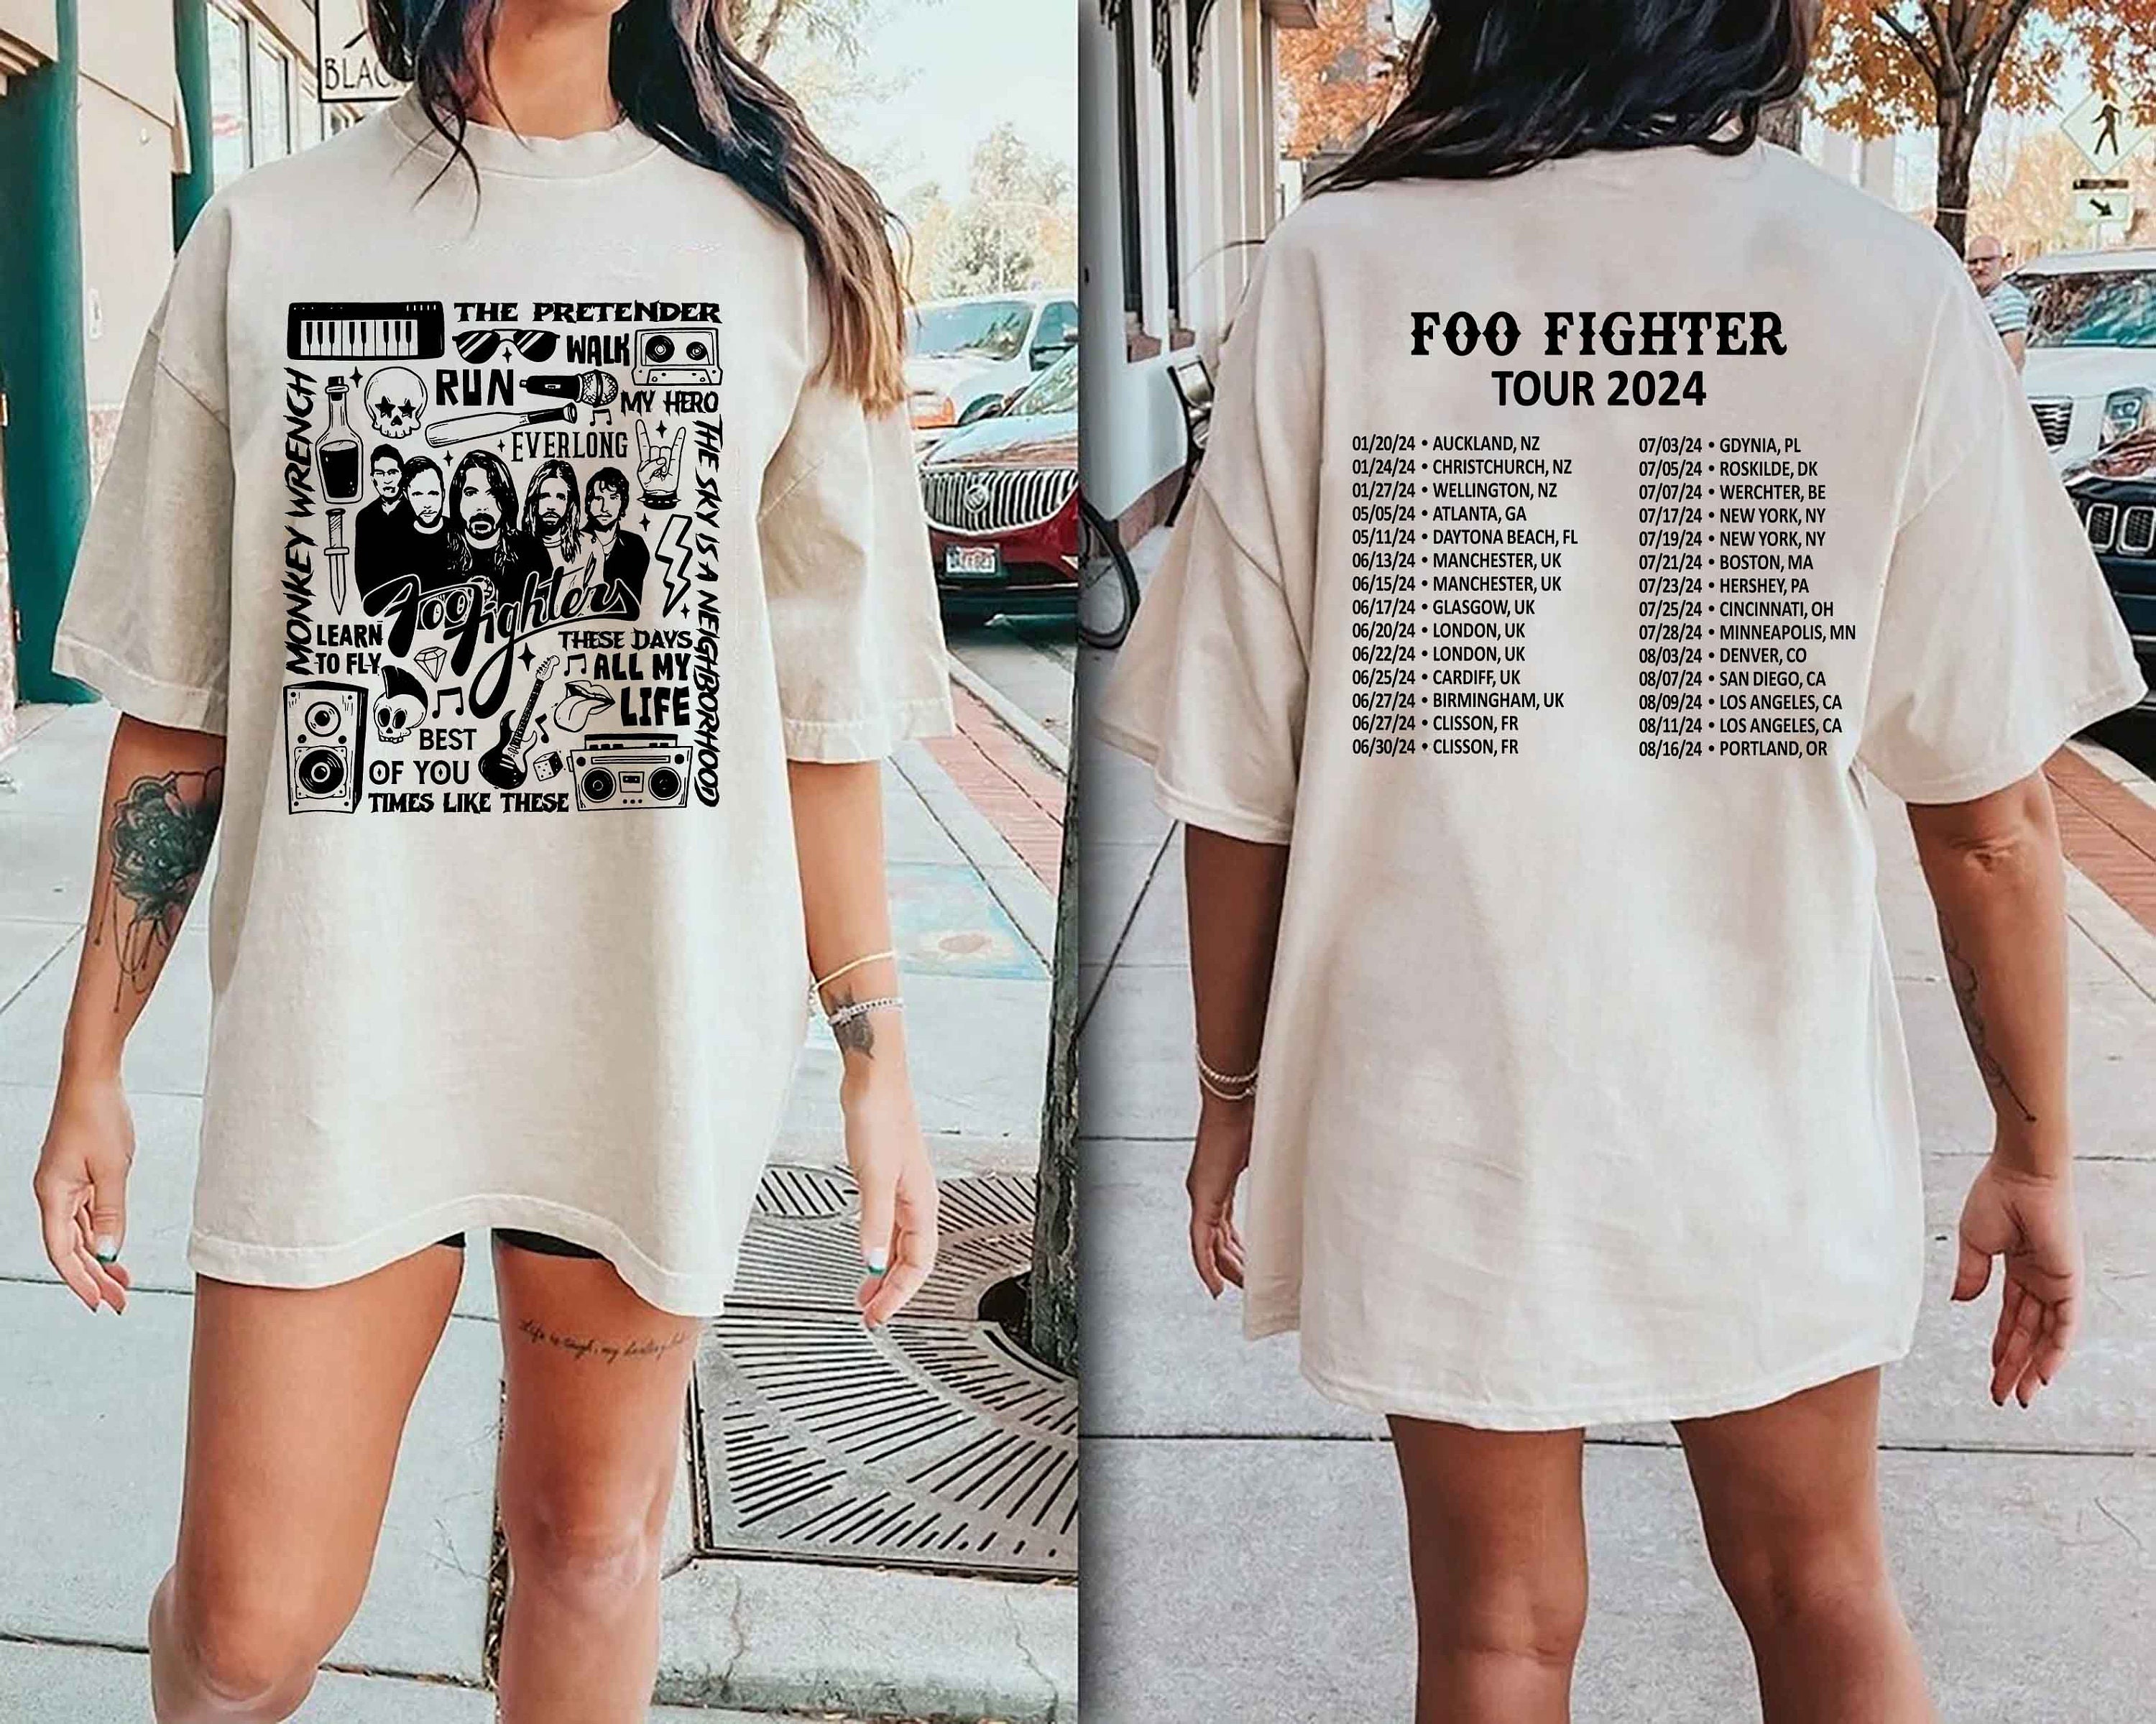 FF Band Fighters Tour 2024 Shirt, FF Band Fighters Shirt